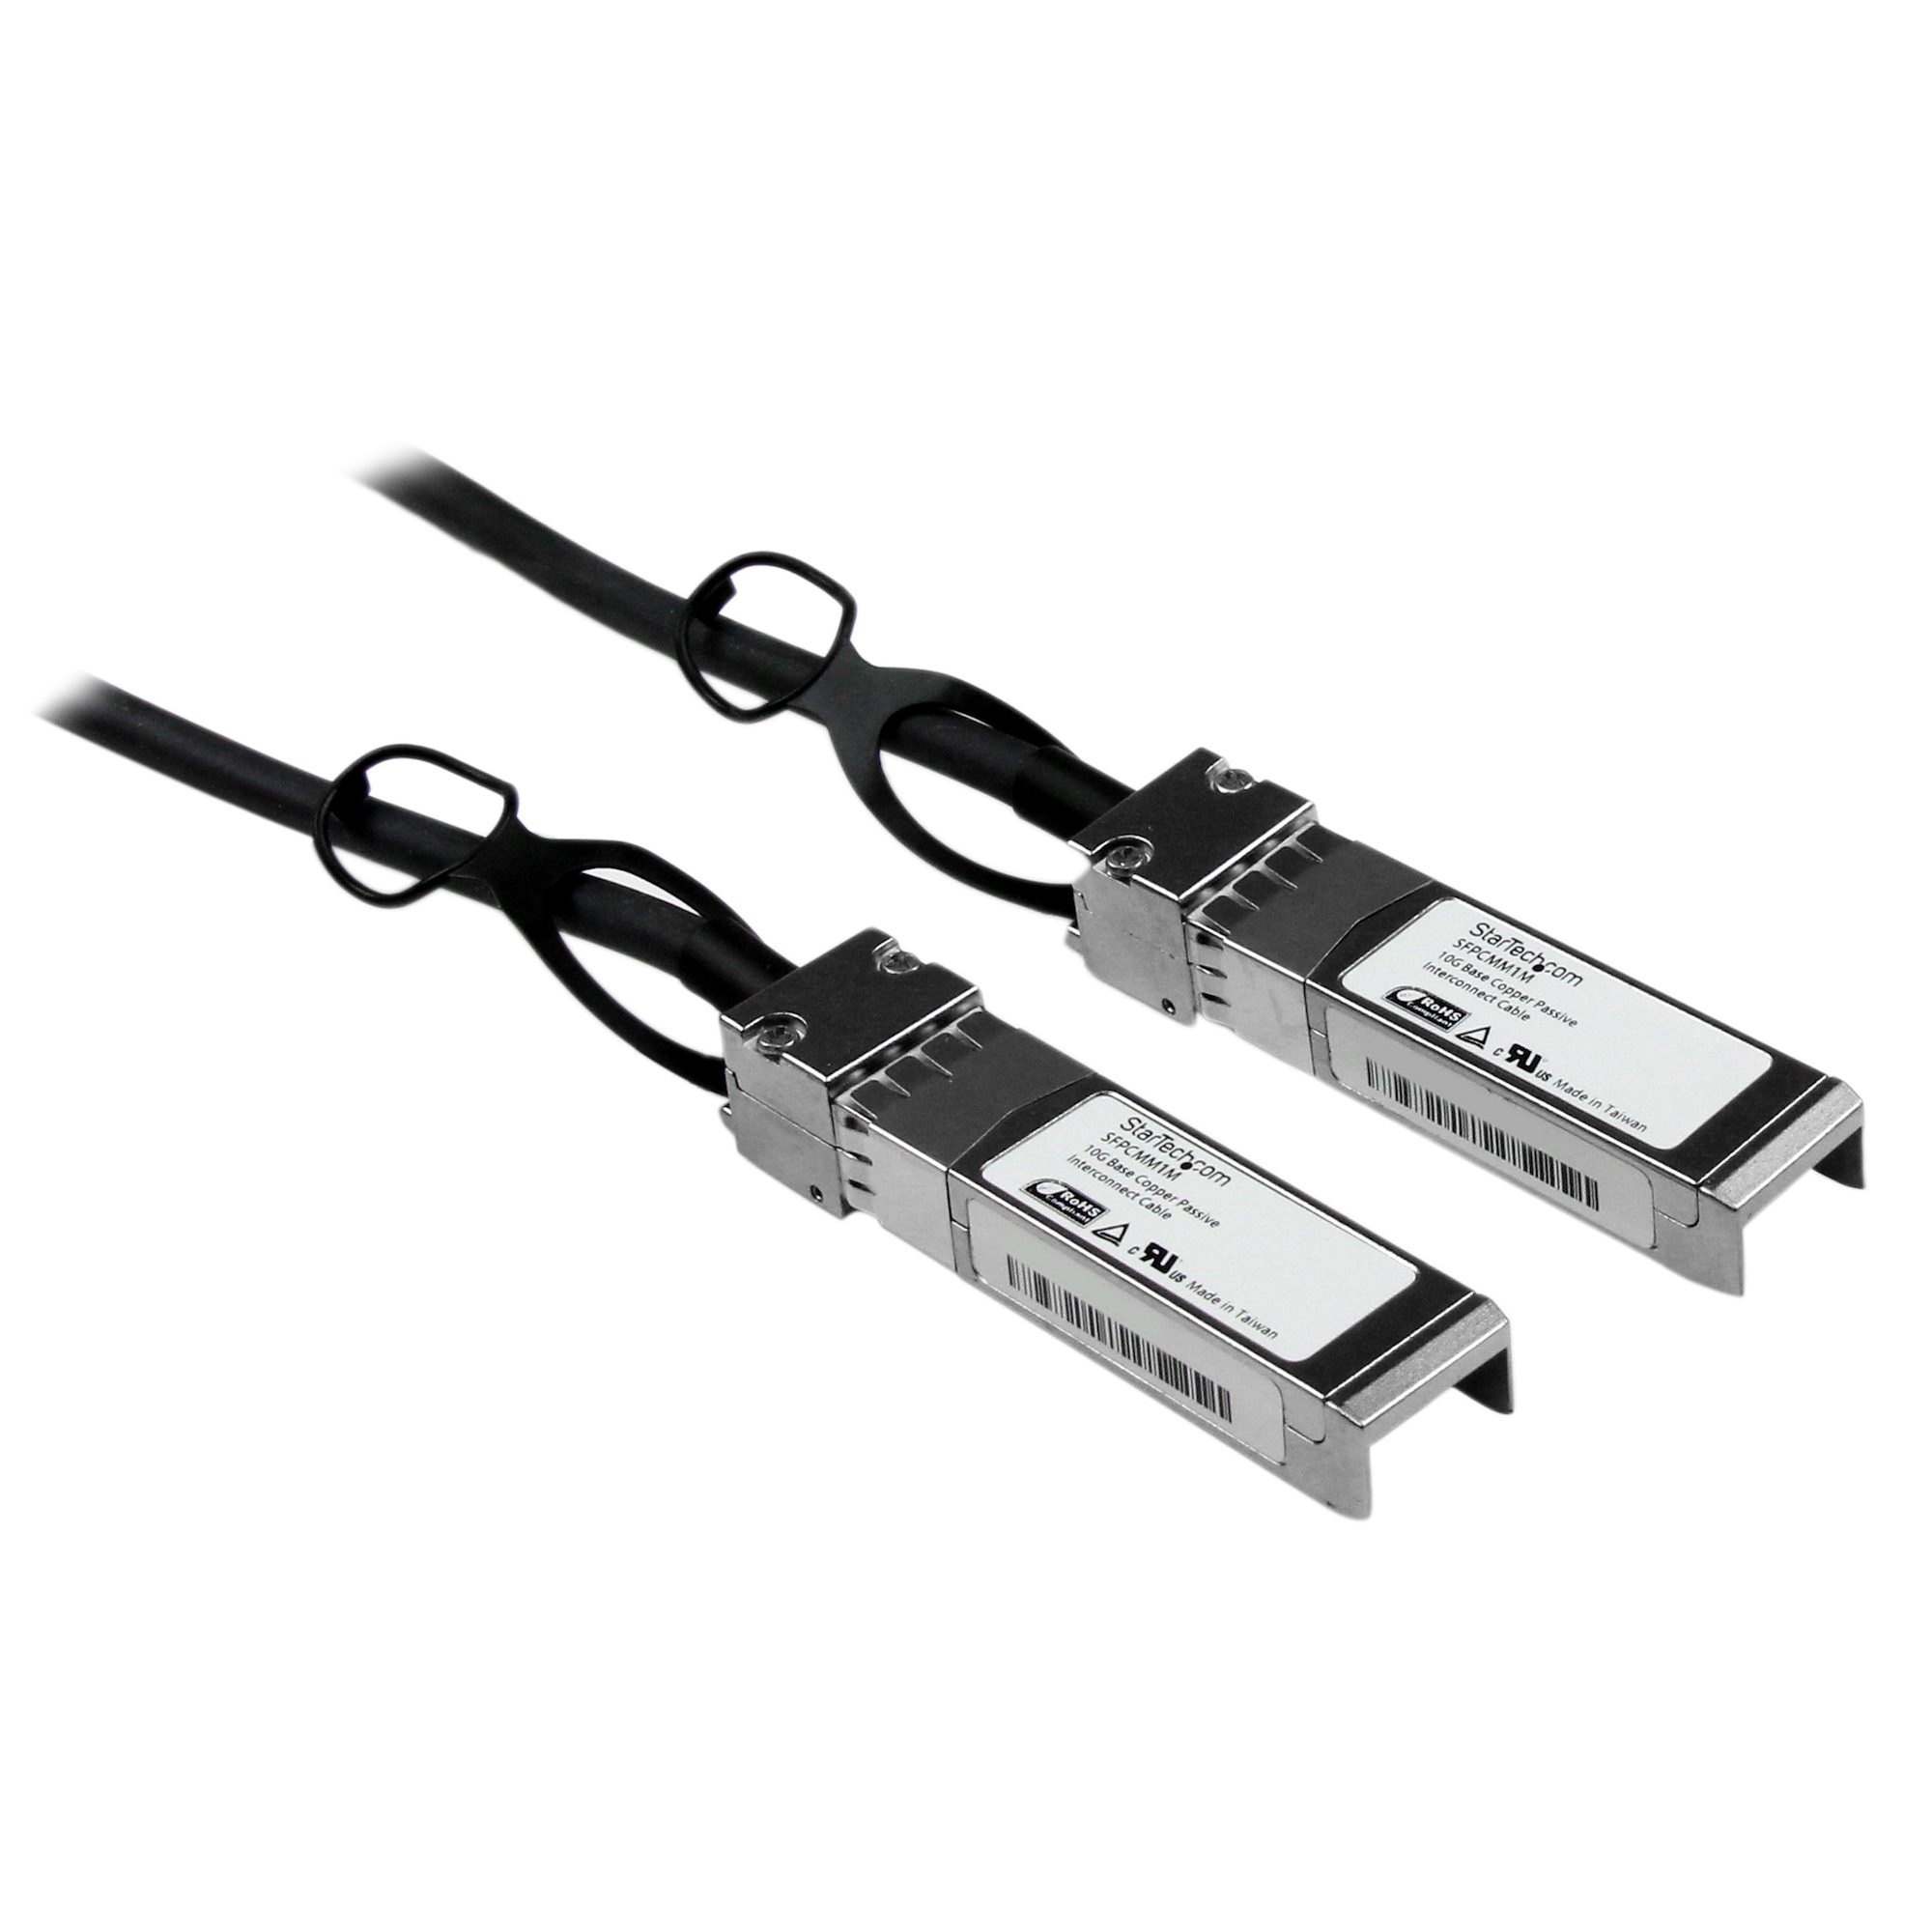 StarTech Cisco Compatible SFP+ 10GbE Cable (2m)